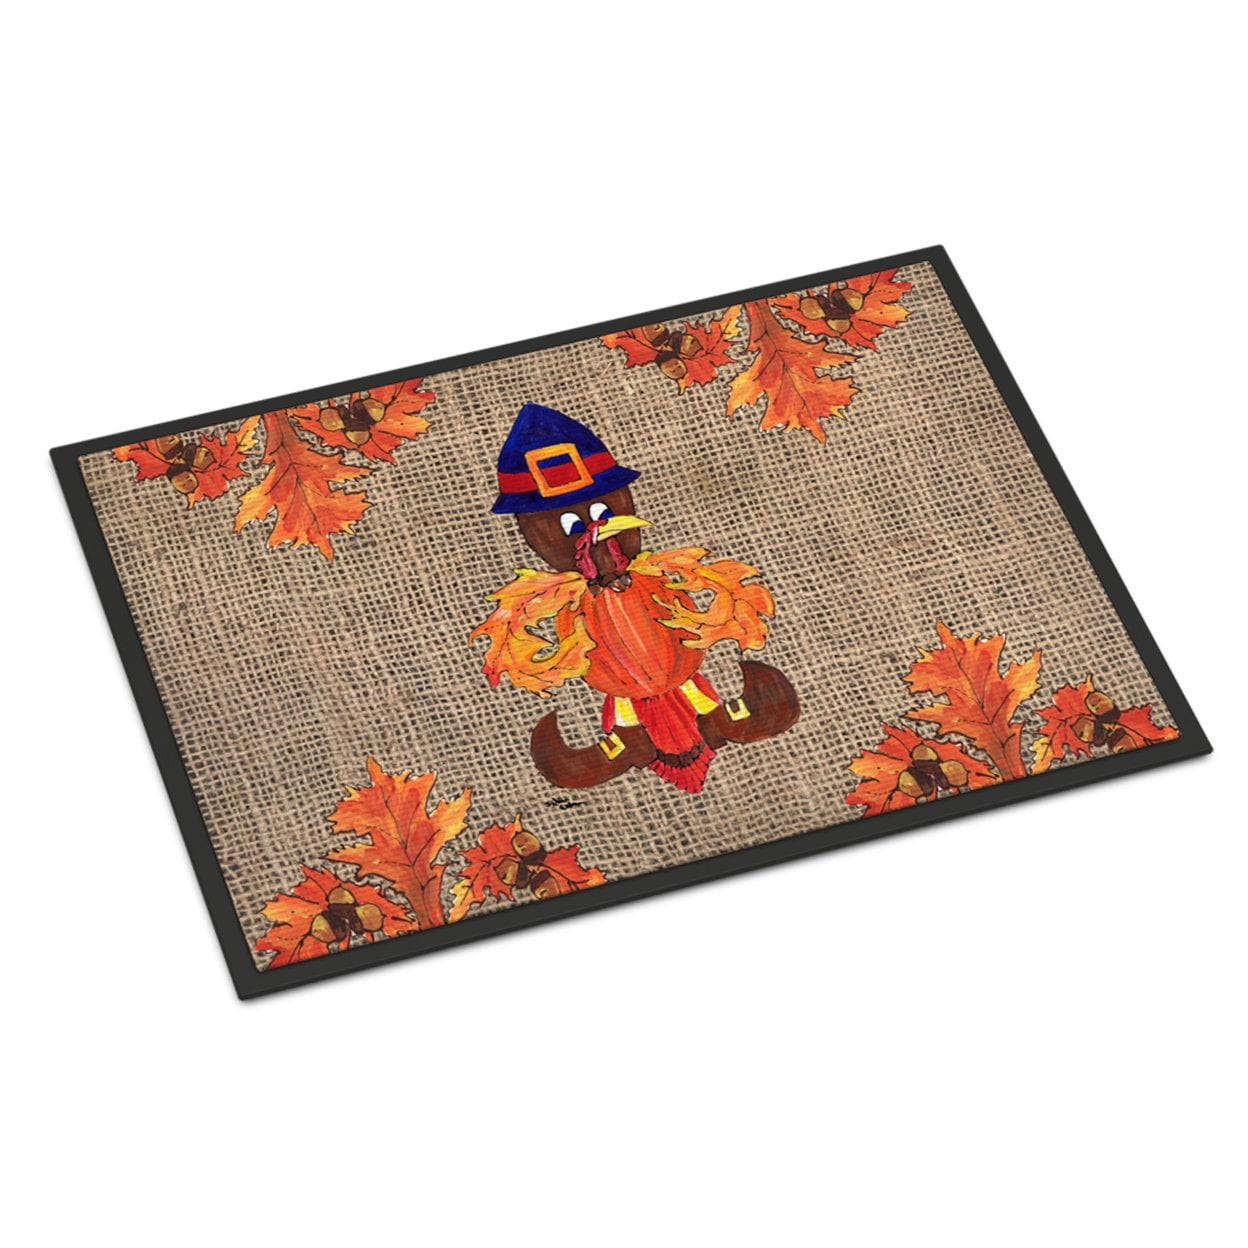 Rubber-Cal Traditional Fleur de Lis French Mat Large Front Door Mat, 24  by 57-Inch 10-106-012P